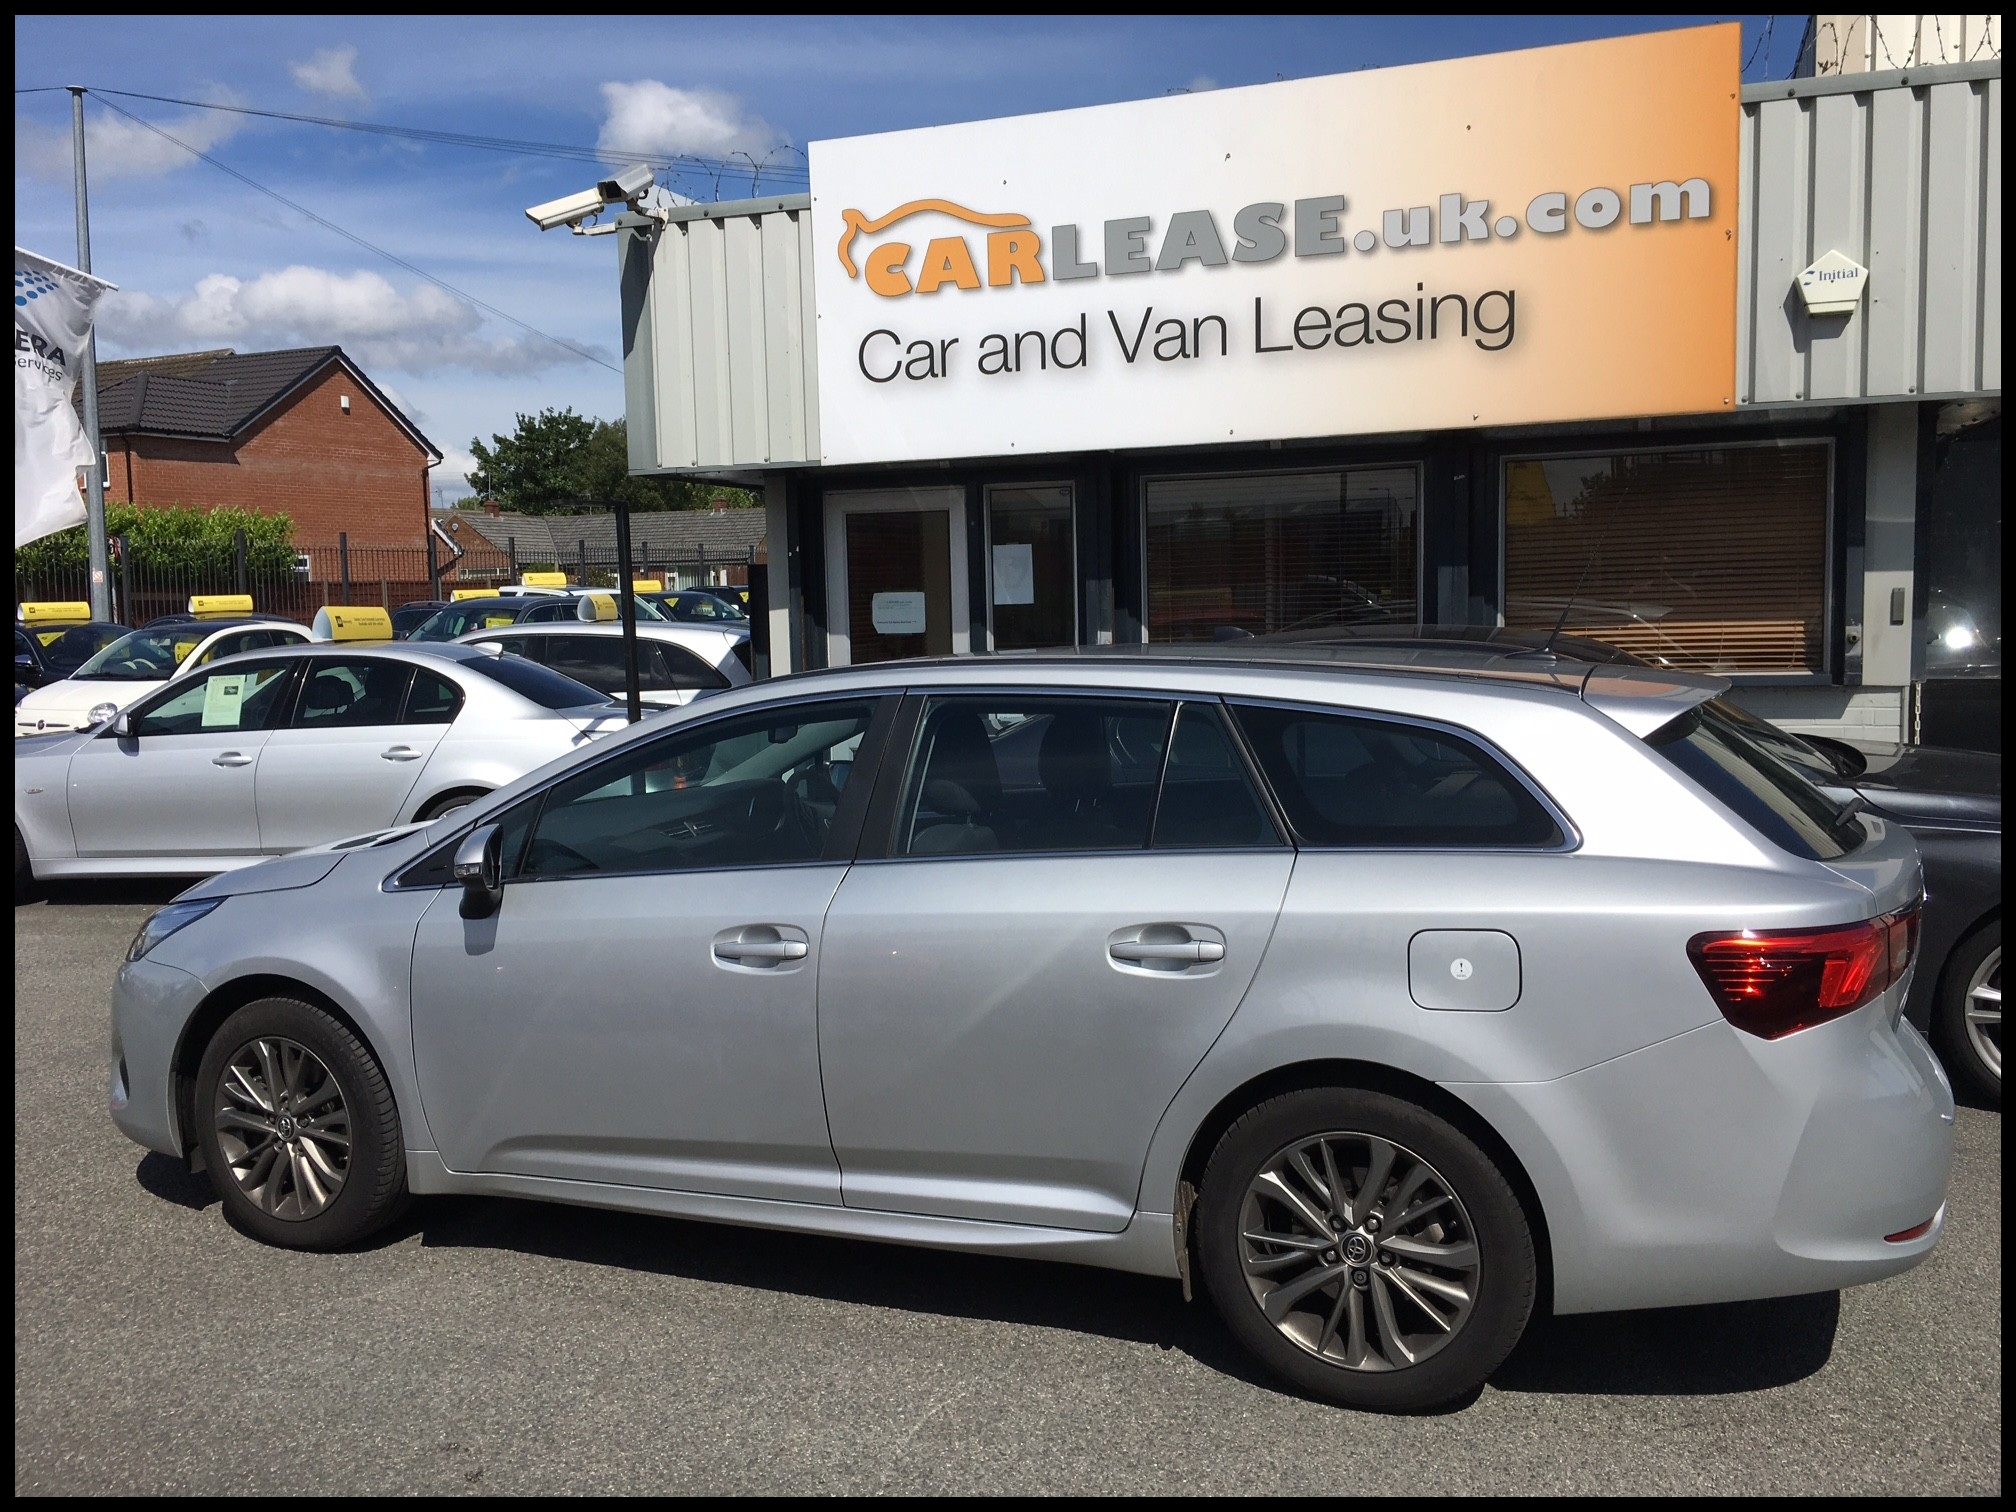 News Road Maintenance Agreement Best In Review the New toyota Avensis New Release